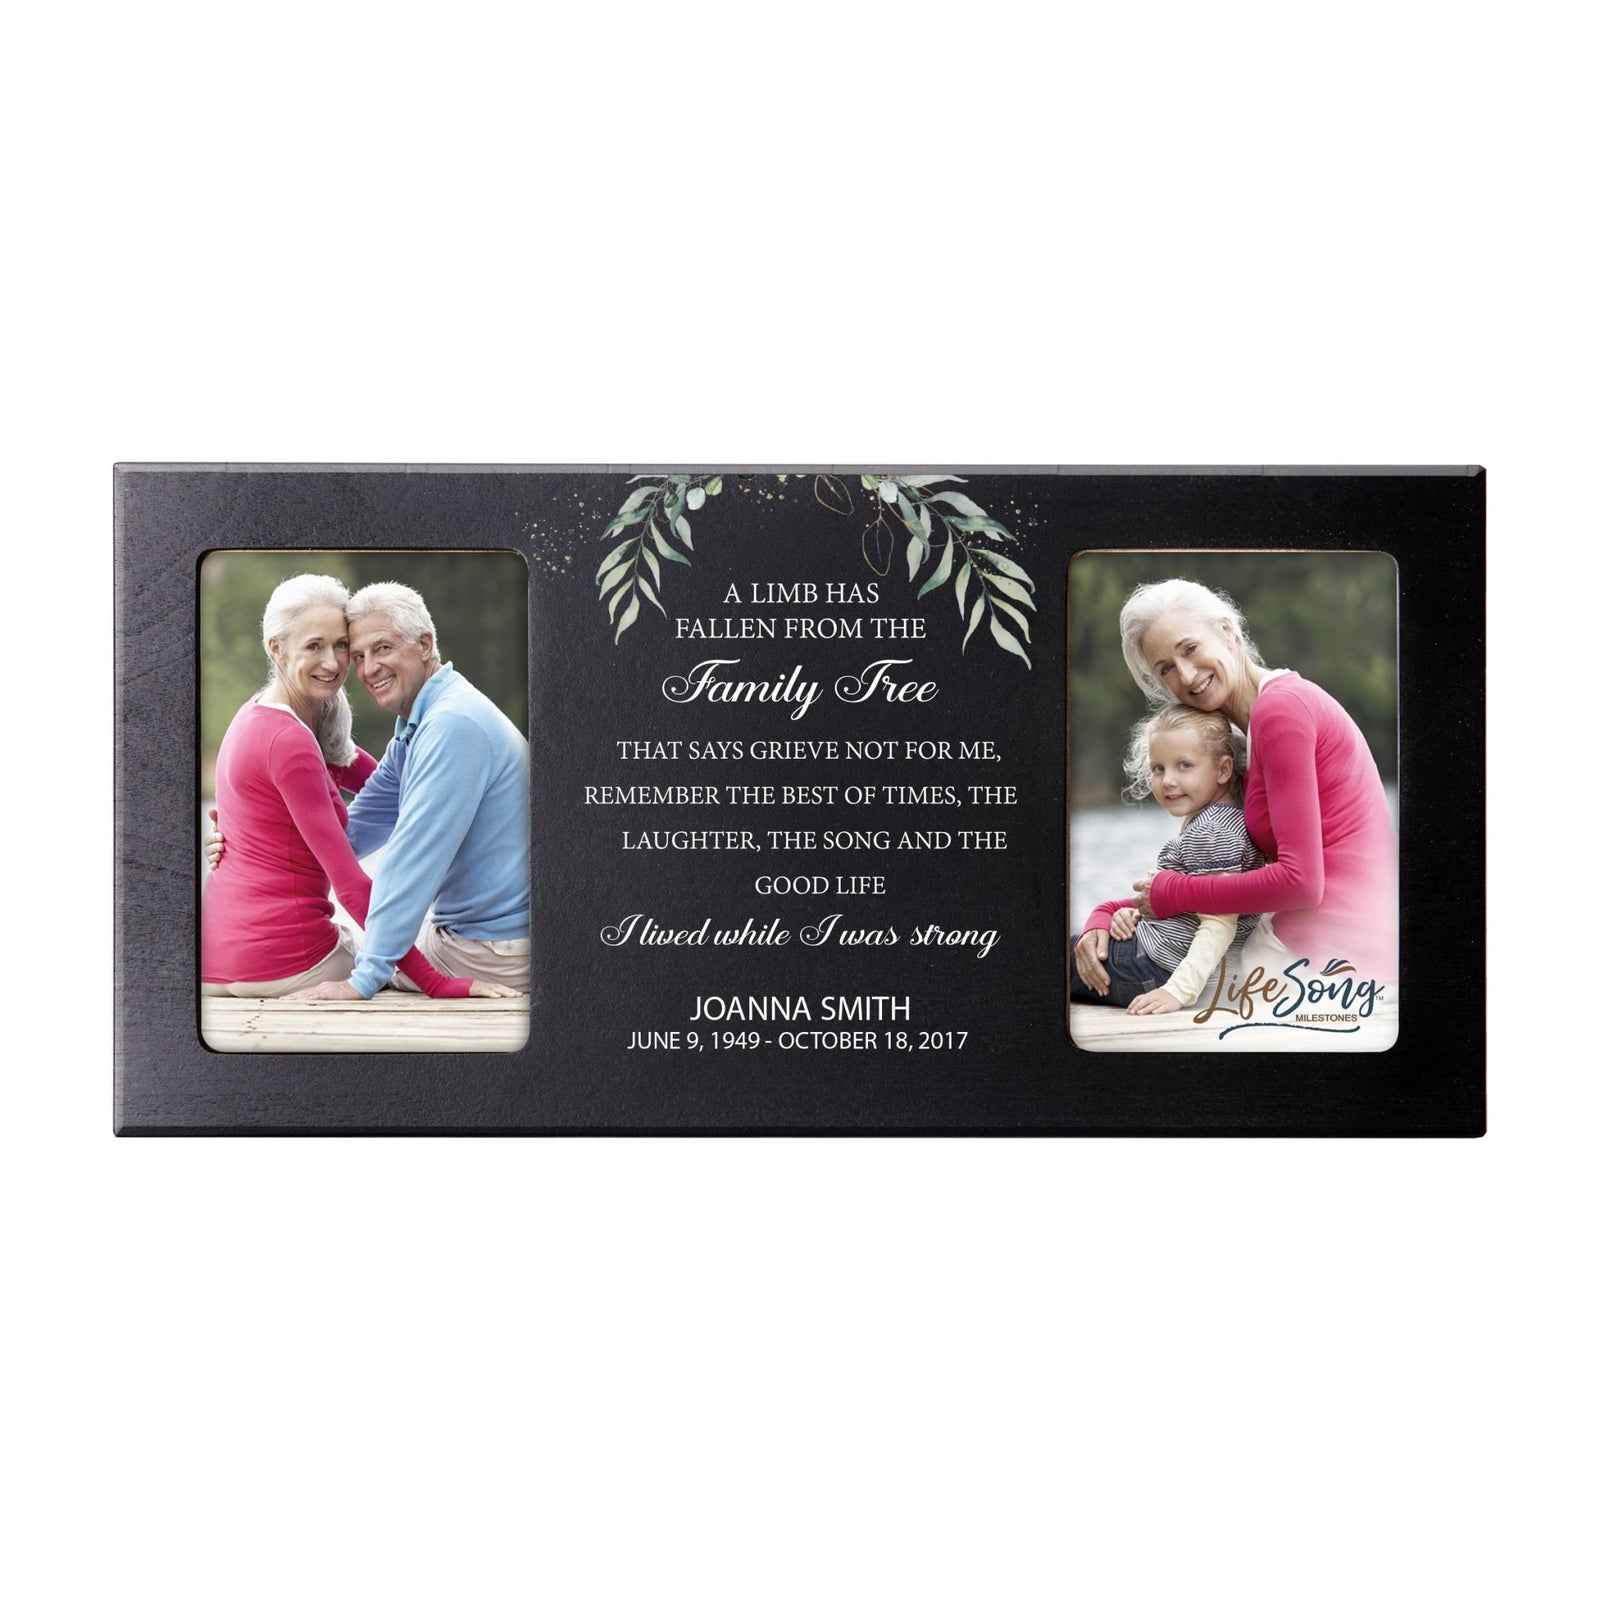 Custom Memorial Picture Frame 16x8in Holds Two 4x6in Photos - A Limb Has Fallen - LifeSong Milestones